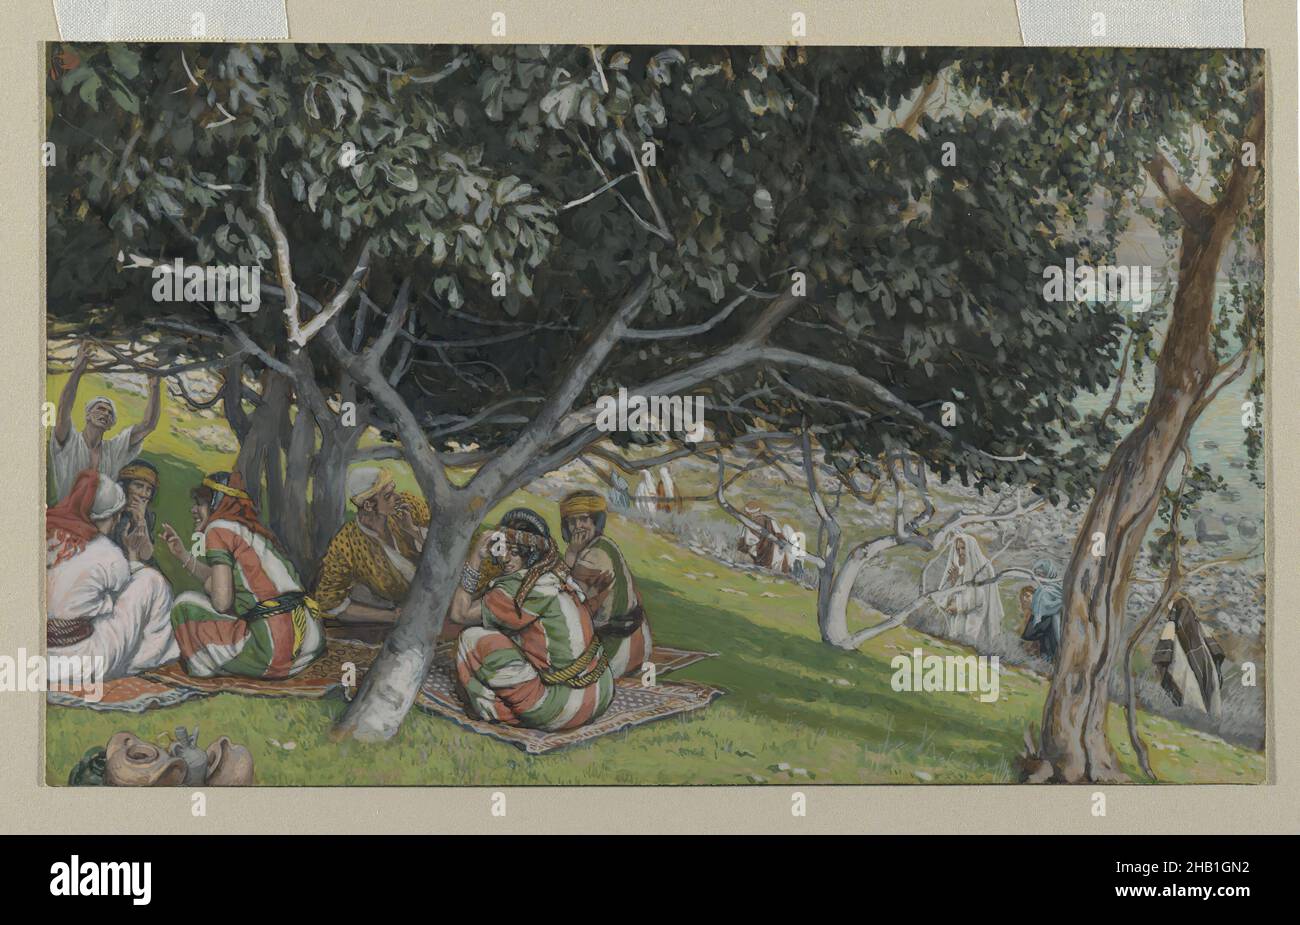 Nathaniel Under the Fig Tree, Nathanaël sous le figuier, The Life of Our Lord Jesus Christ, La Vie de Notre-Seigneur Jésus-Christ, James Tissot, French, 1836-1902, Opaque watercolor over graphite on gray wove paper, France, 1886-1894, Image: 6 5/16 x 10 7/16 in., 16 x 26.5 cm, Bartholomew, Bible, biblical, Catholicism, Christ, Christianity, French, God, Jesus, John 1:44-51, laborers, nathaniel, New Testament, picnic, Religion, Religious, stripes, Tissot, trees Stock Photo